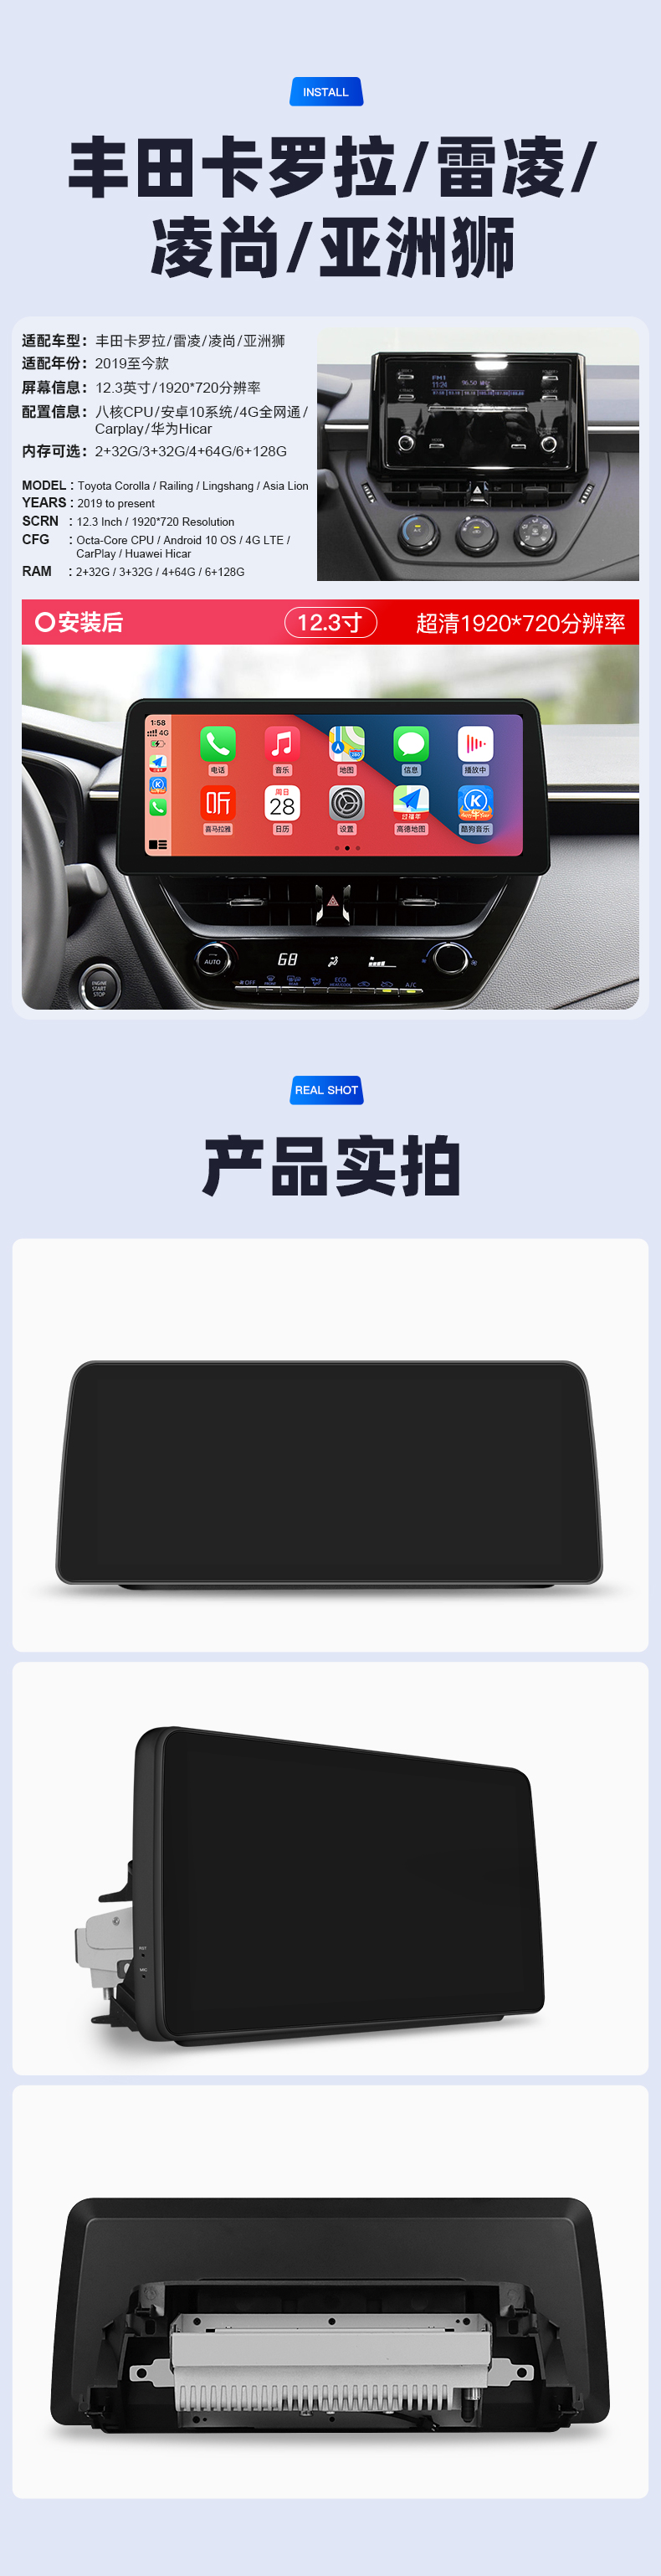 Toyota Corolla/Railing/Lingshang/Asia Lion Car Stereo, Years 2019 to Present